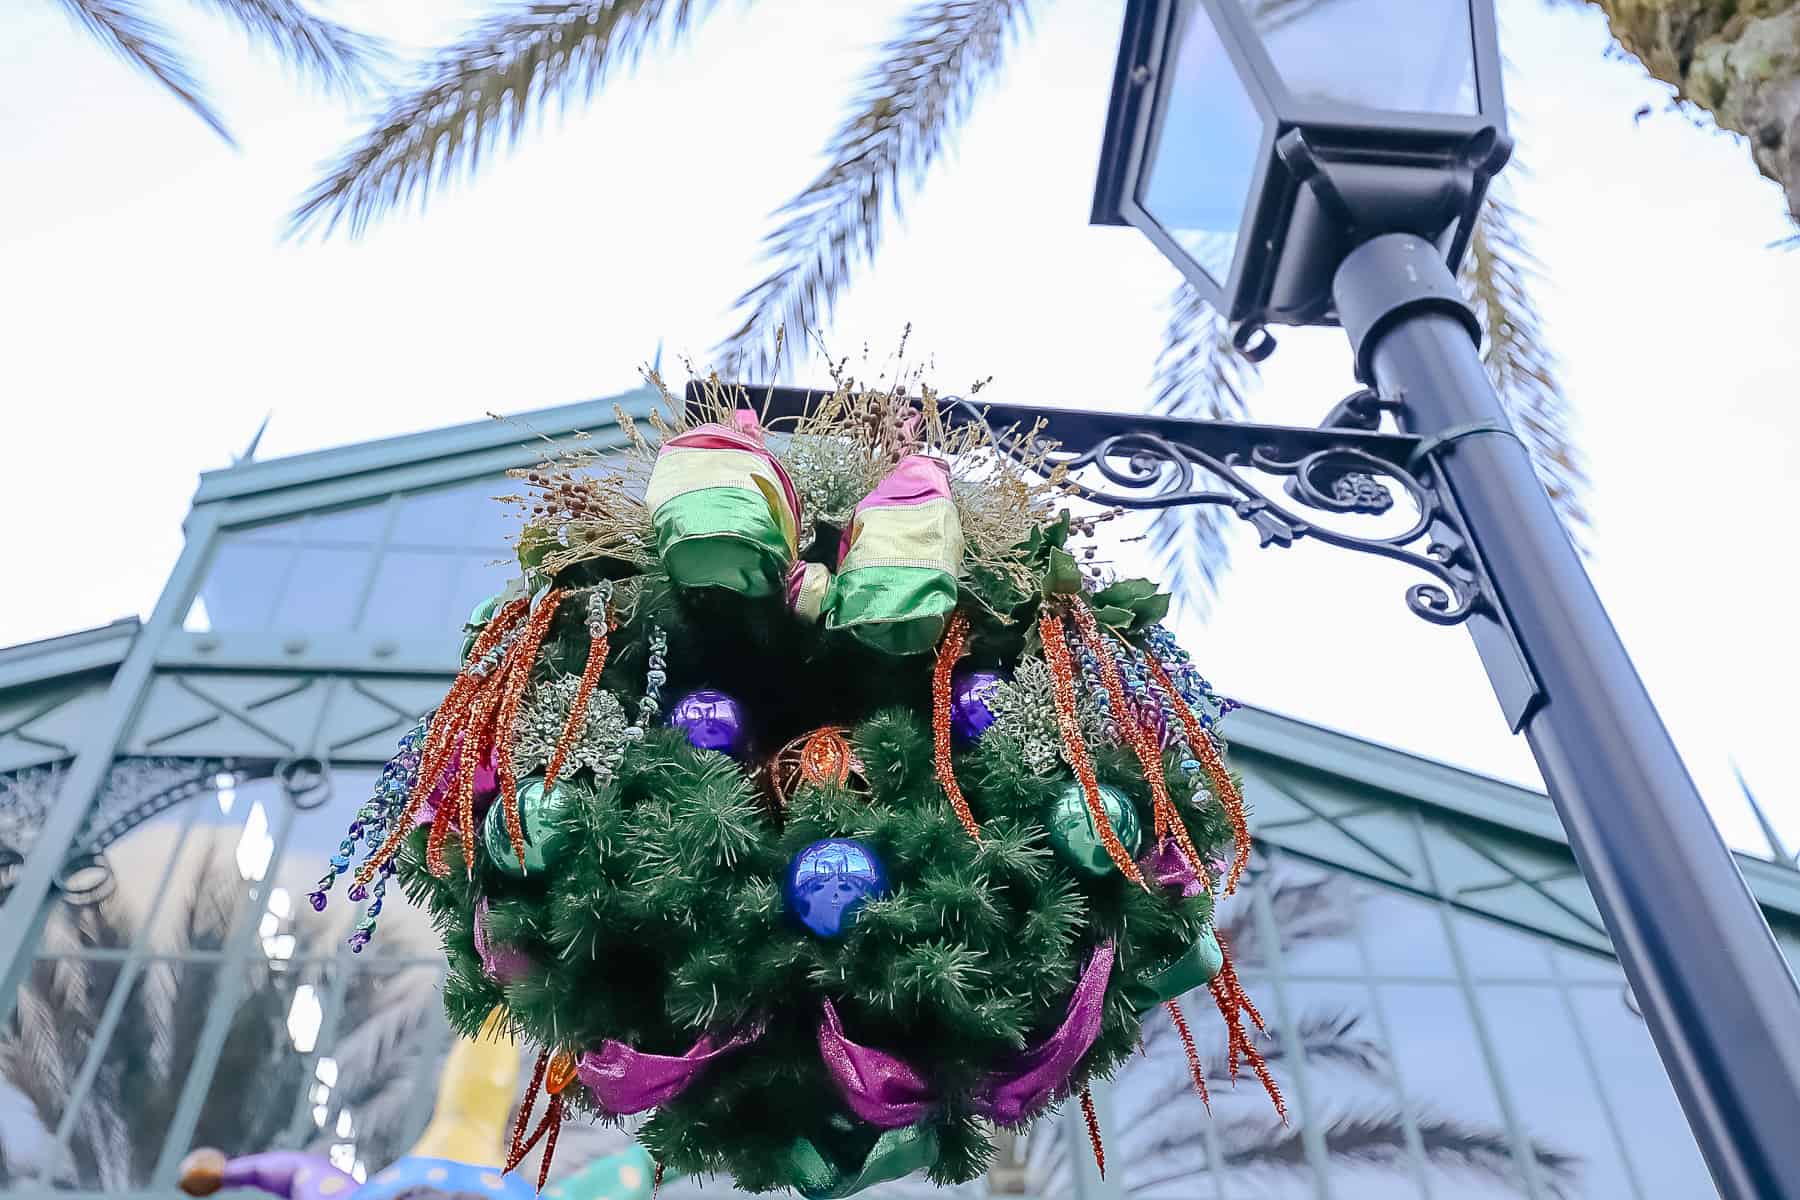 Wreaths hanging from a light pole with large bows. 